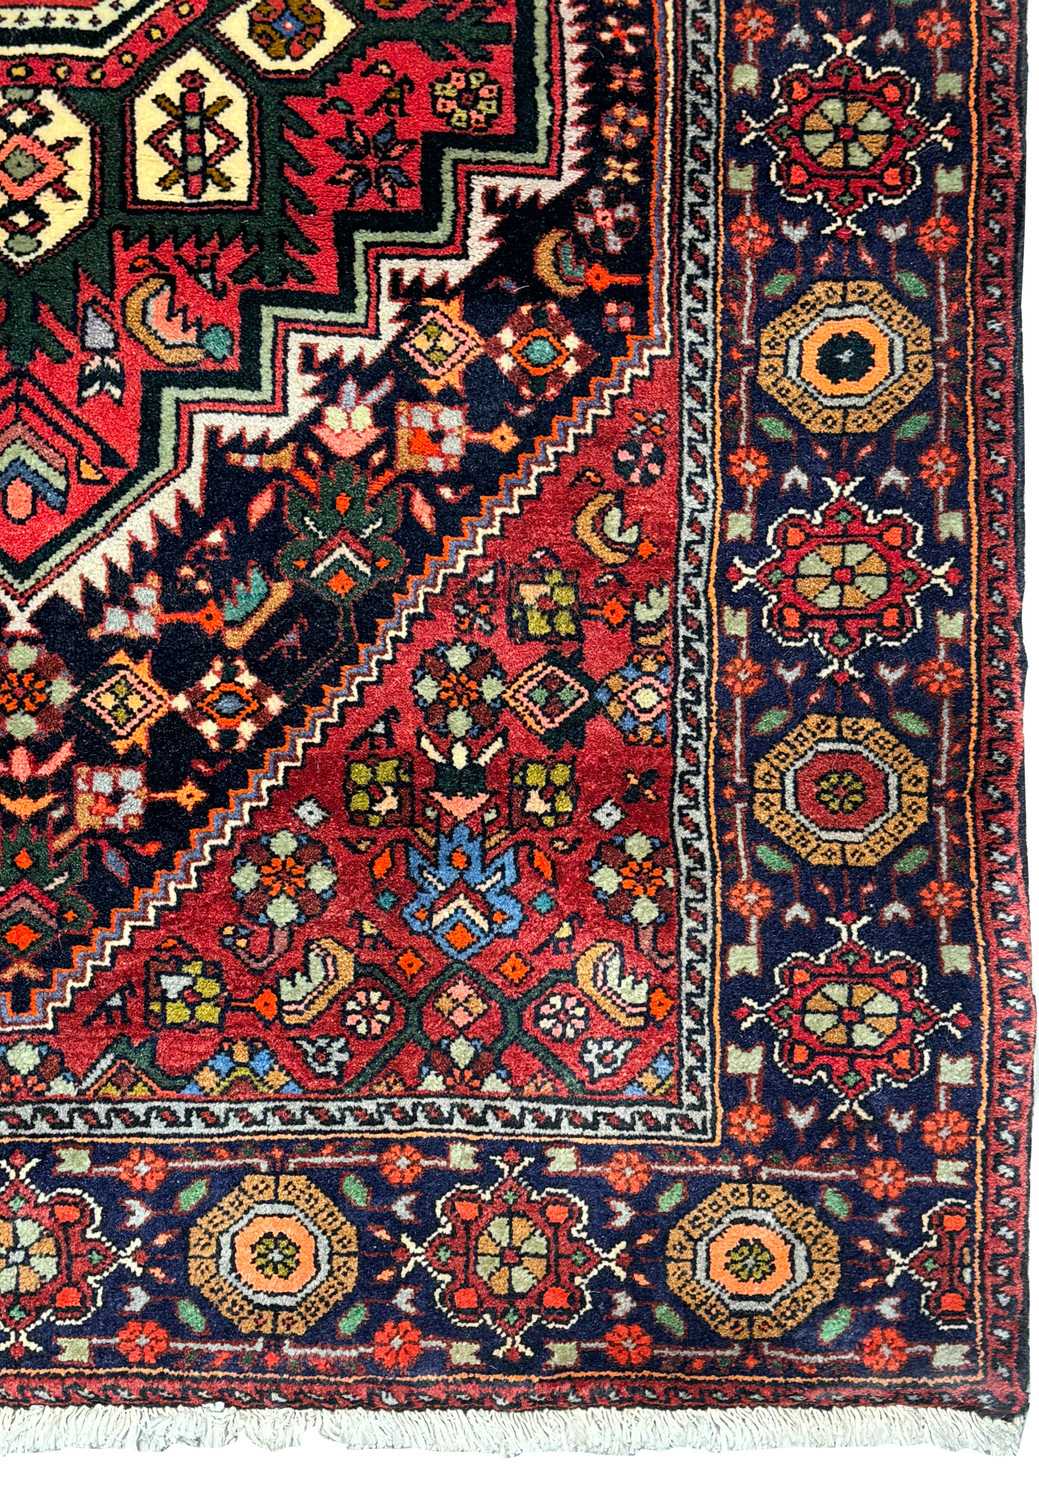 The corner of the Persian Gholtogh rug, displaying the fine craftsmanship of the border with its series of geometric and floral motif